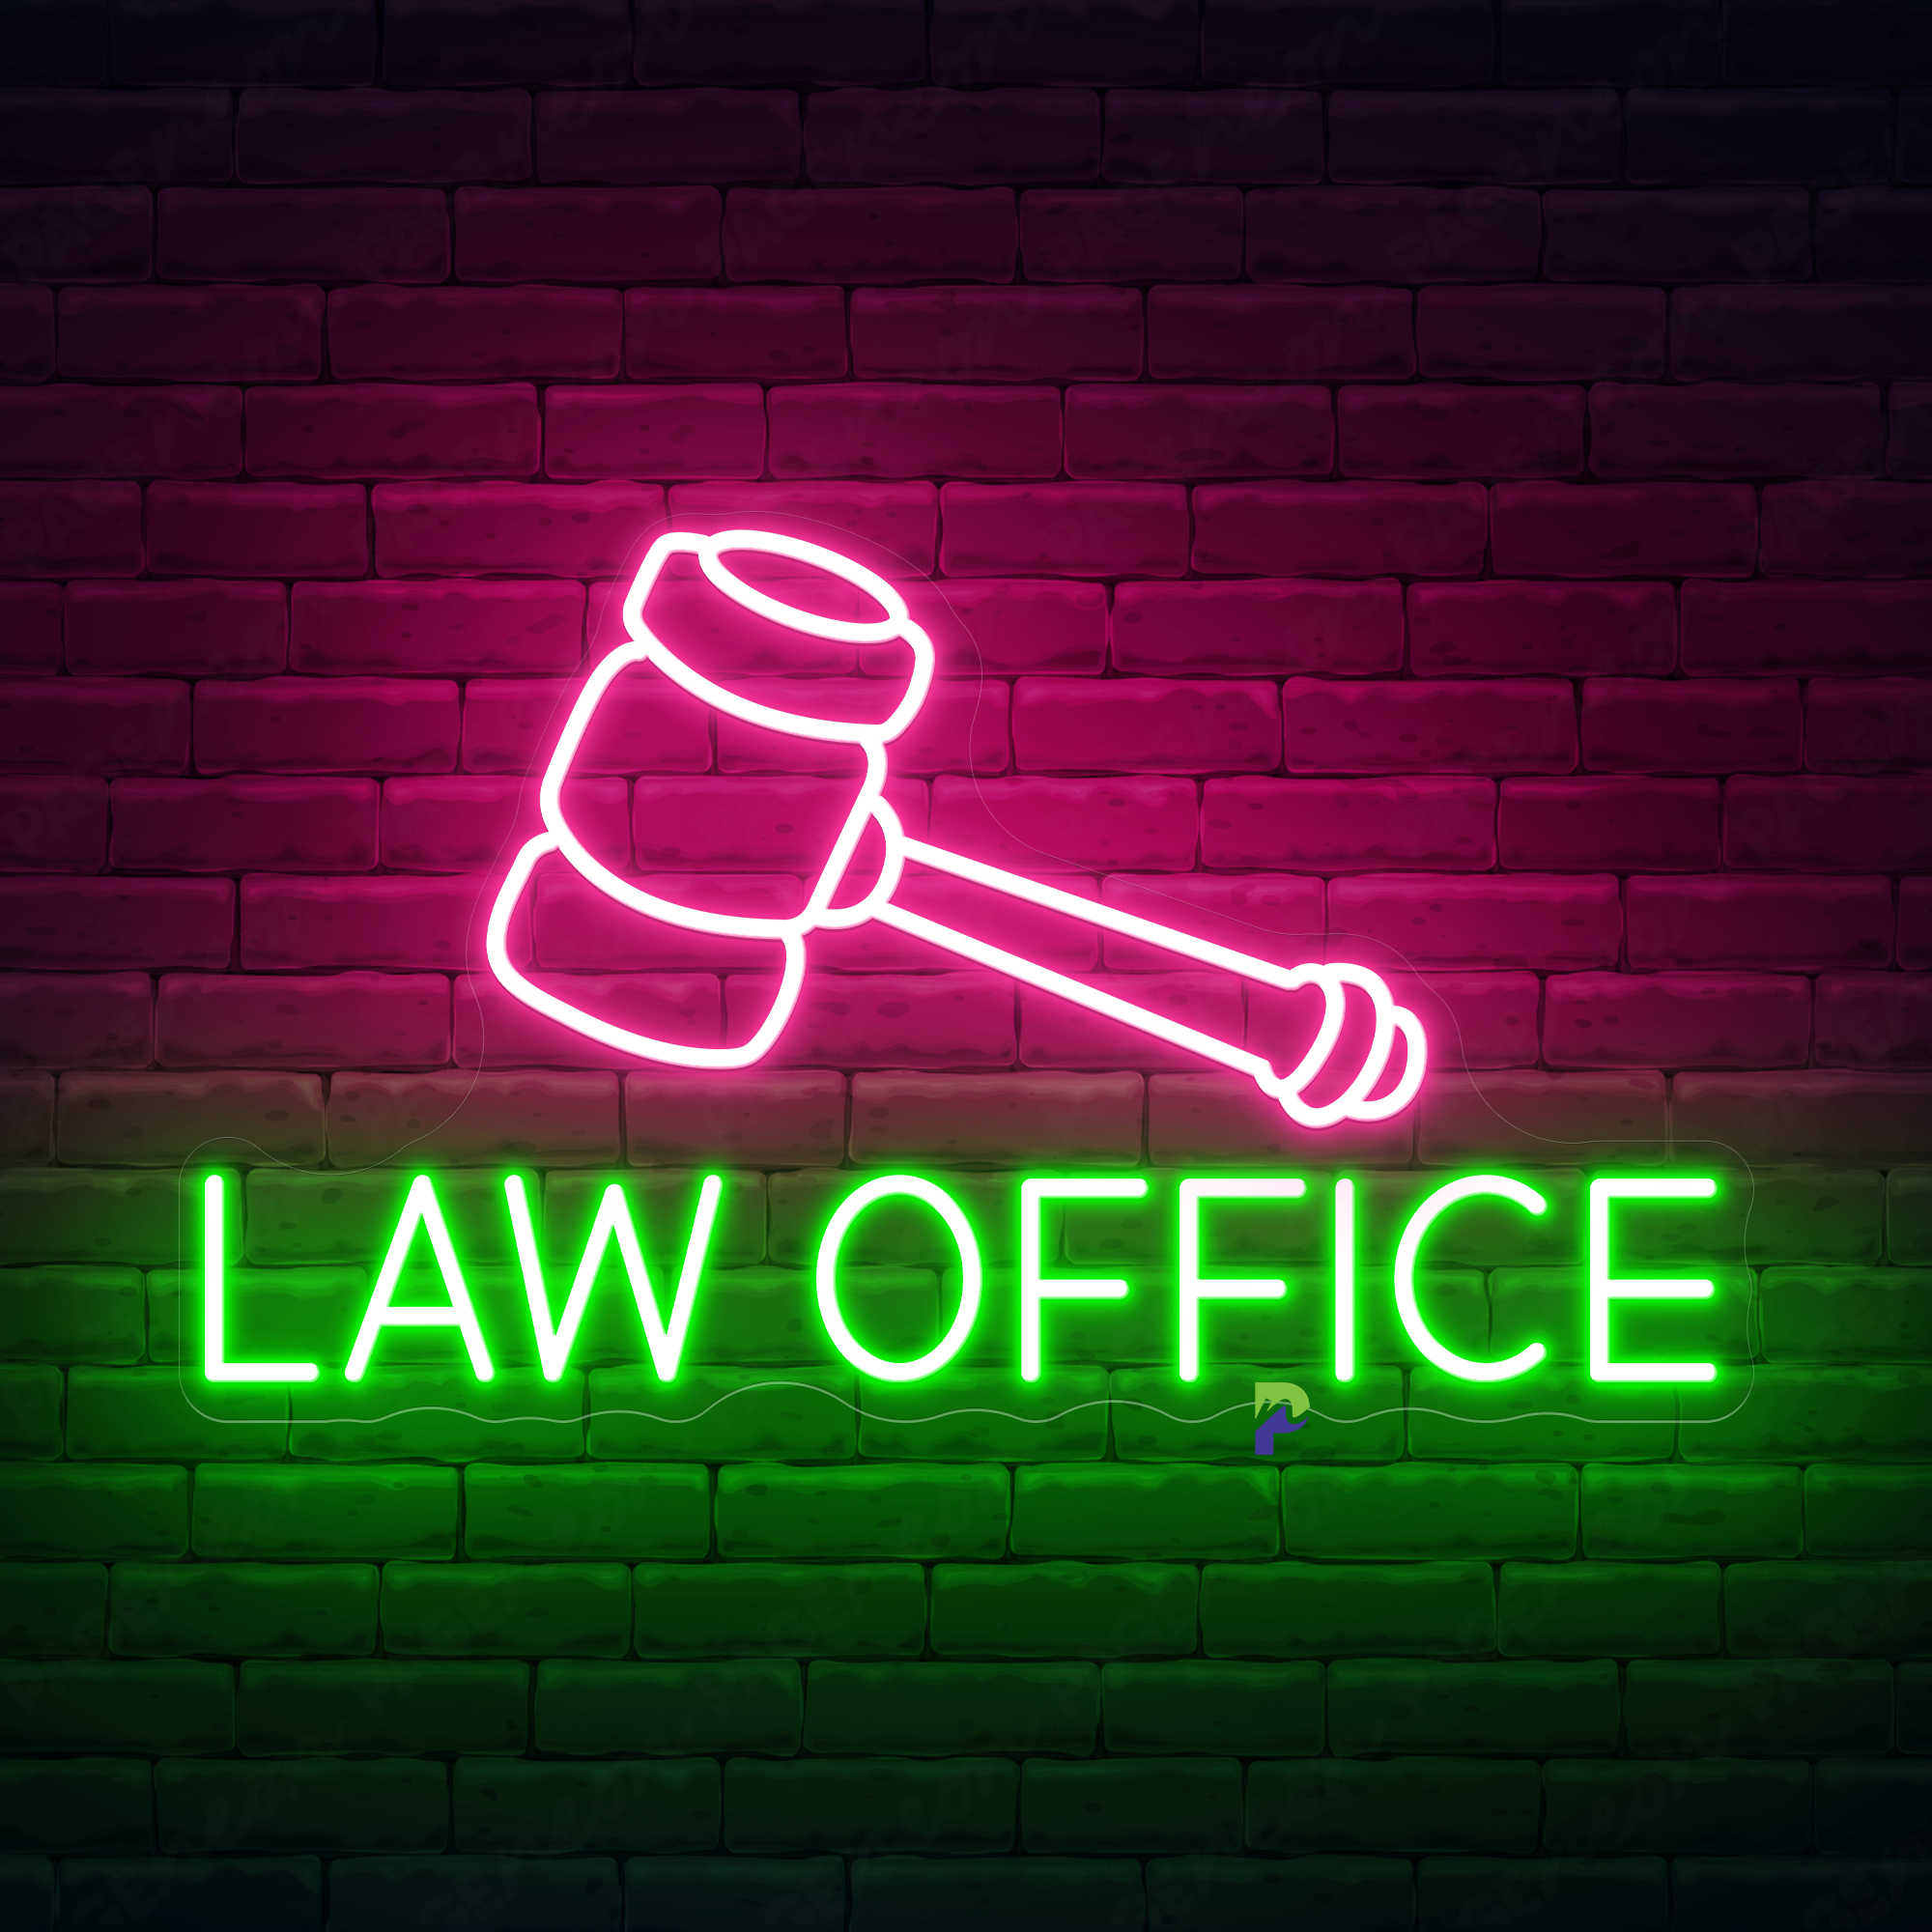 Law Office Neon Sign Legal Business Led Light